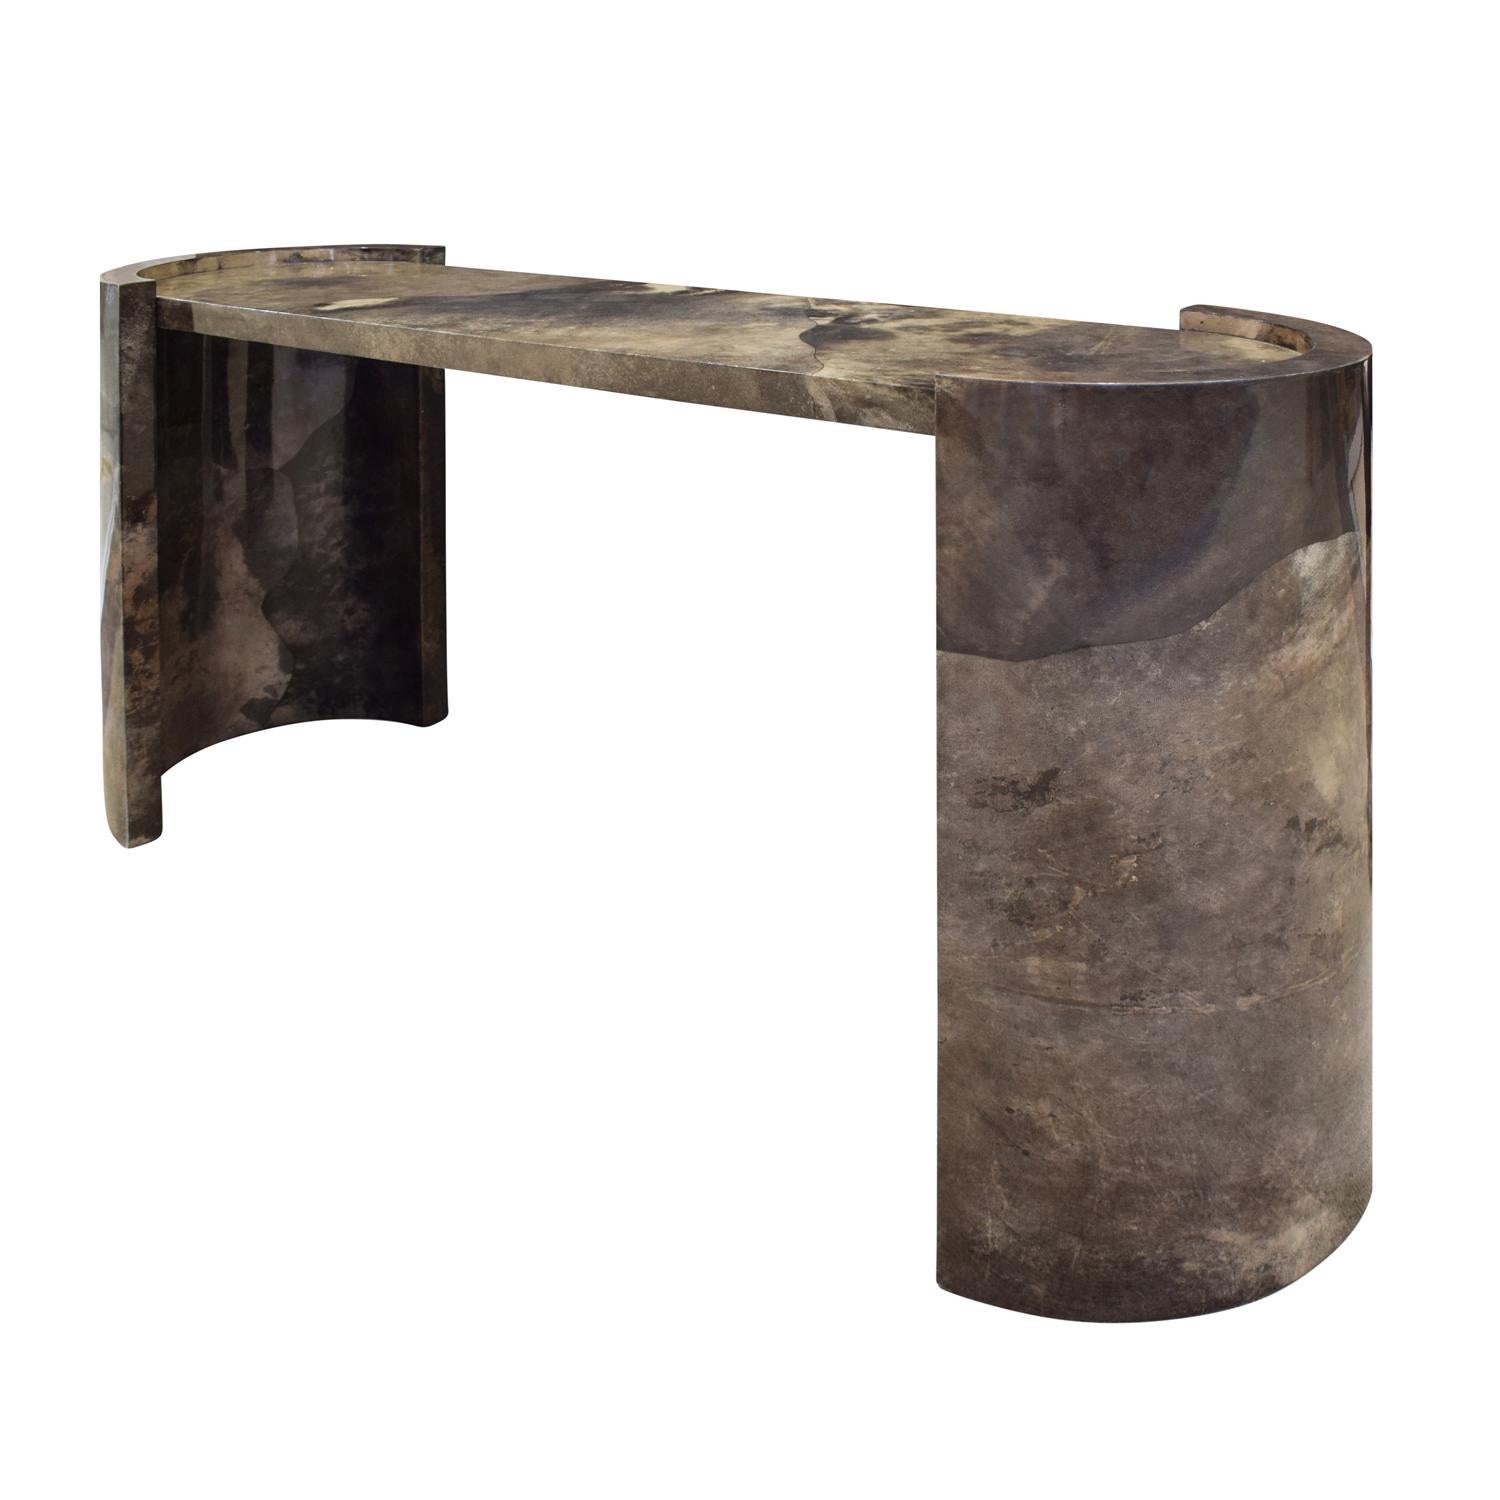 Impressive console table in taupe and brown mirror lacquered goatskin with racetrack top and curved sides by Karl Springer, American 1980. Dated on bottom.  This table exemplifies the impeccable craftsmanship of Karl Springer.  